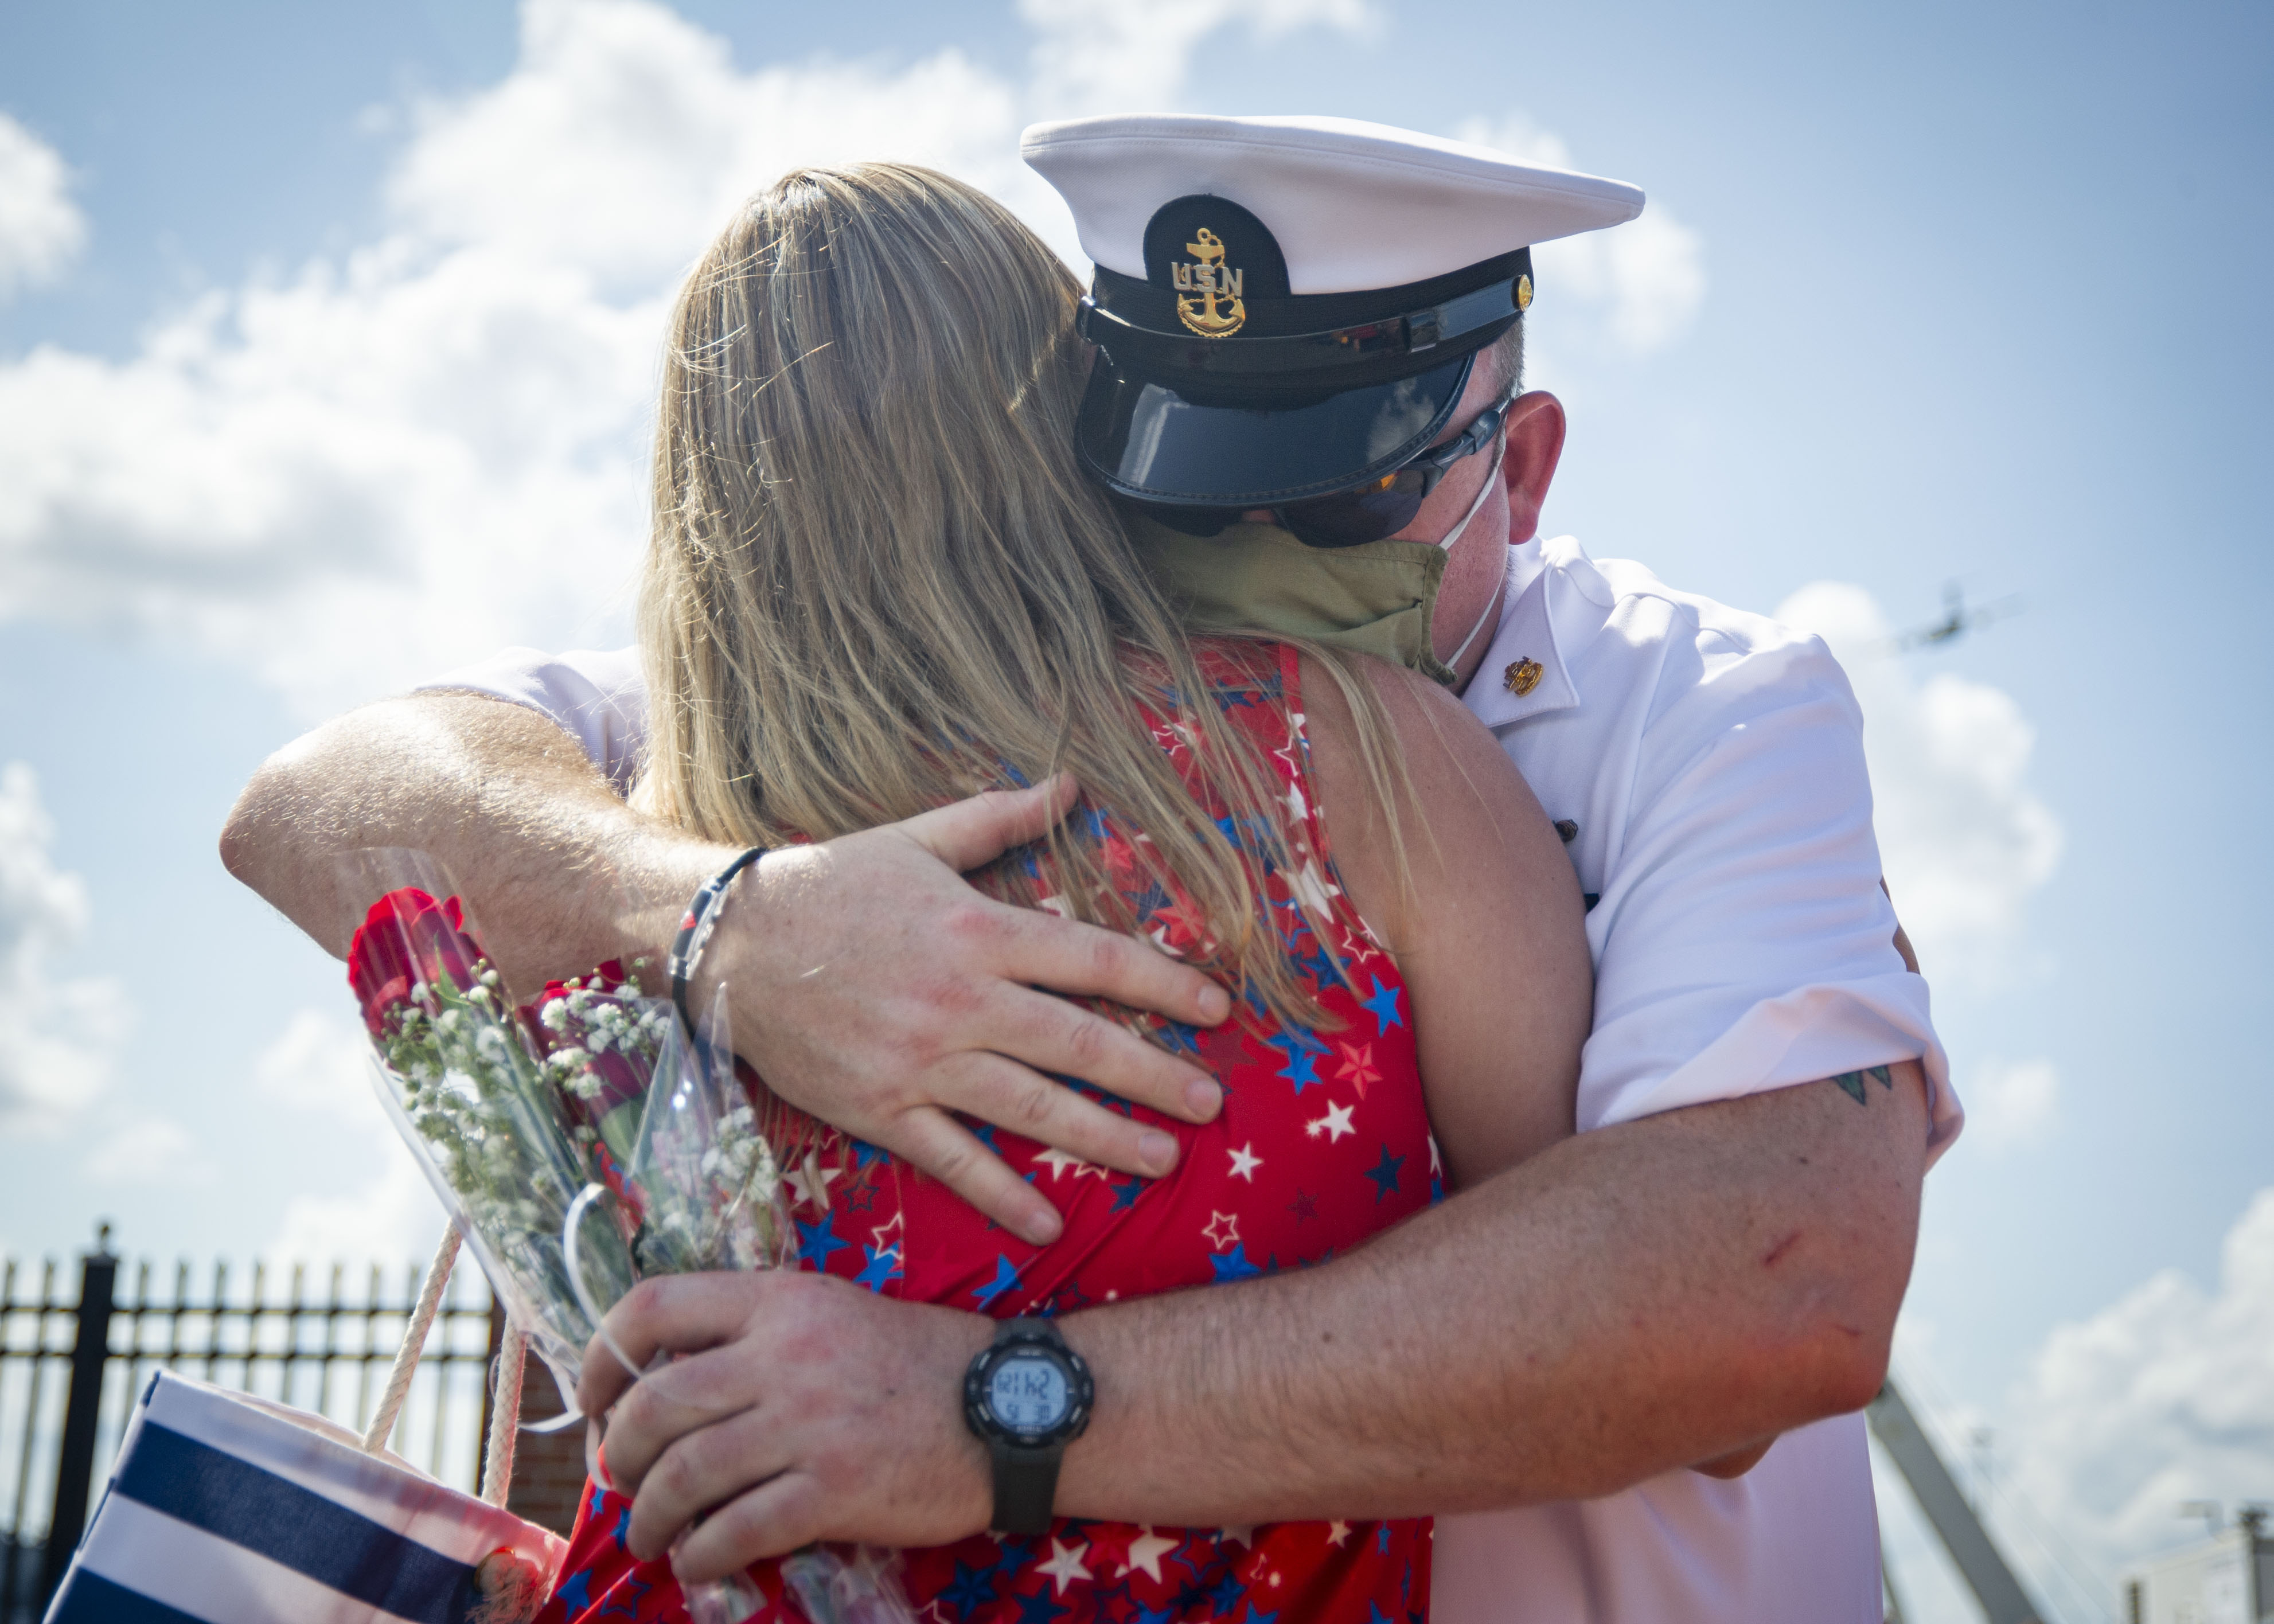 Chief Machinist’s Mate (Nuclear) Scott Hasenwinkel, assigned to the Virginia-Class fast-attack submarine USS New Mexico (SSN 779), embraces his significant other, Nicole Hasenwinkel, during the boat’s homecoming at Naval Station Norfolk, Sept. 15, 2021.